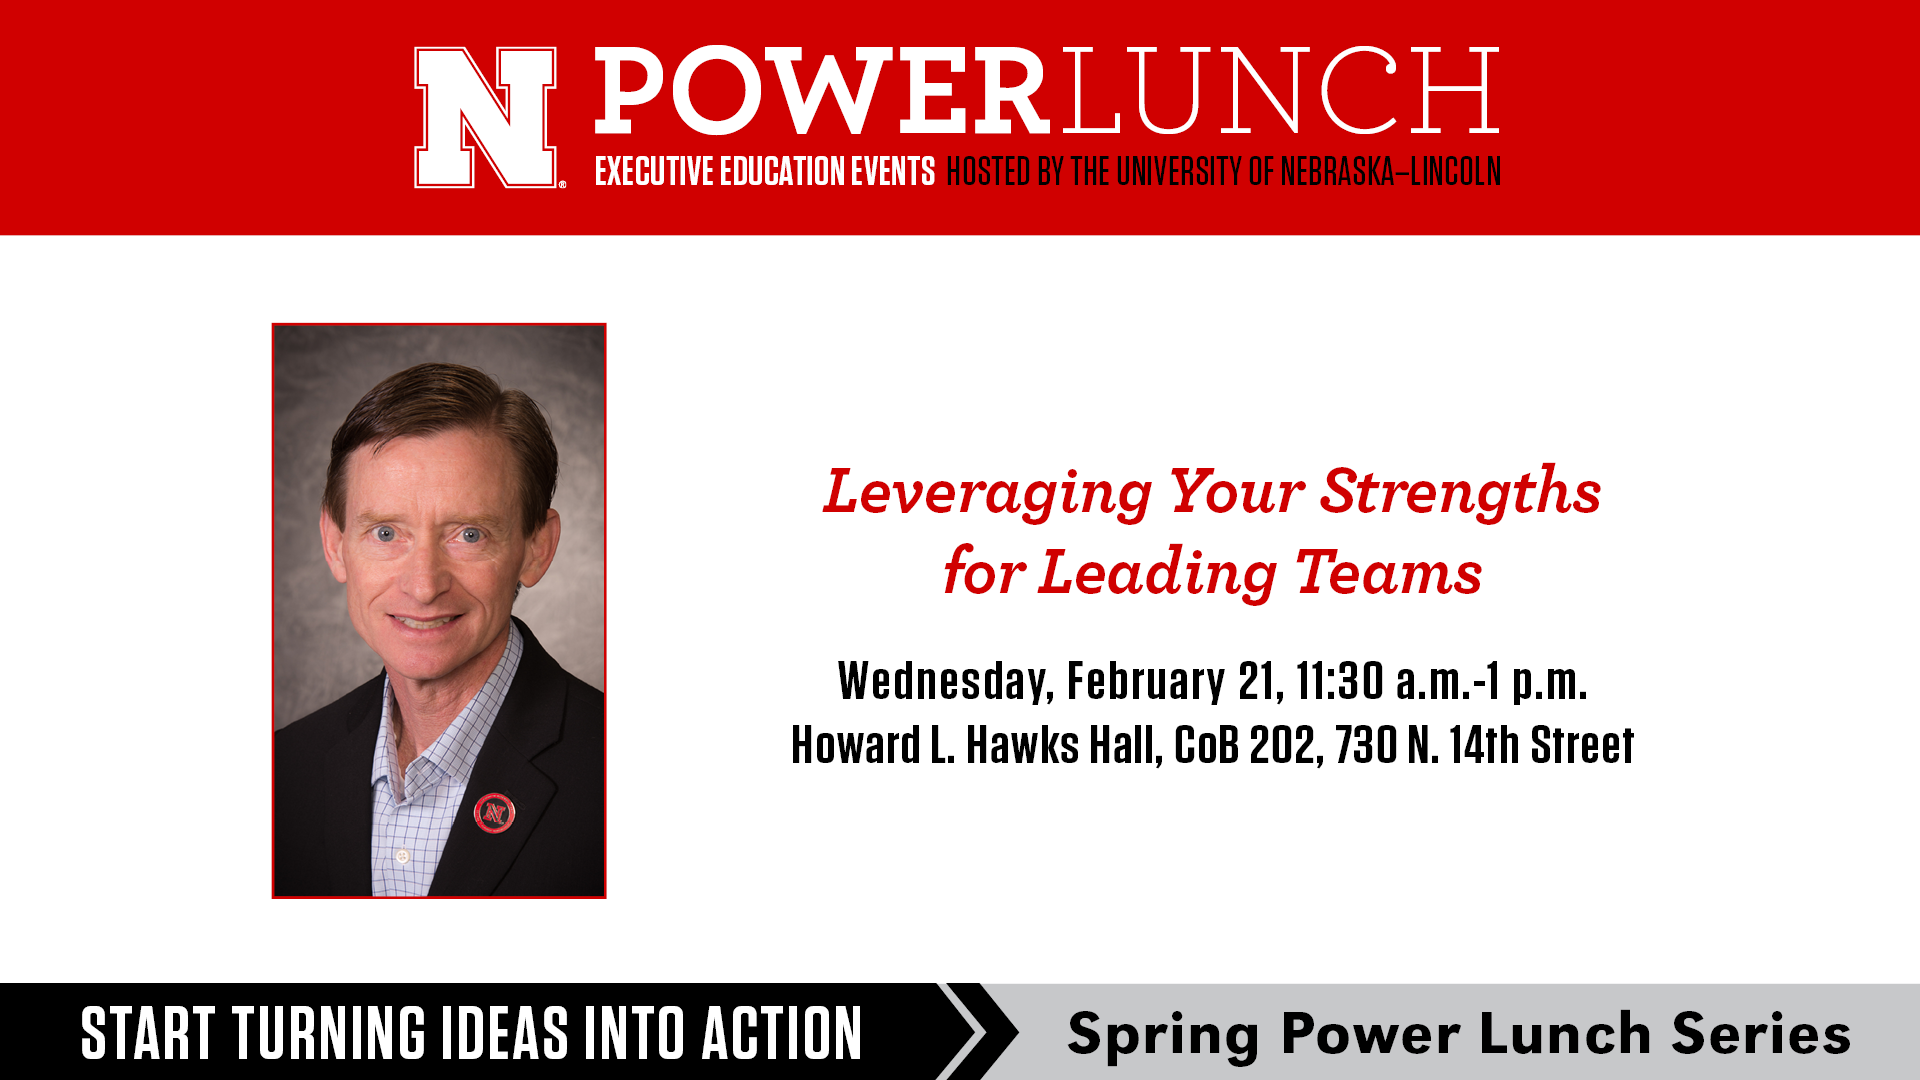 Apply for a Registration Waiver to Attend a Power Lunch Free